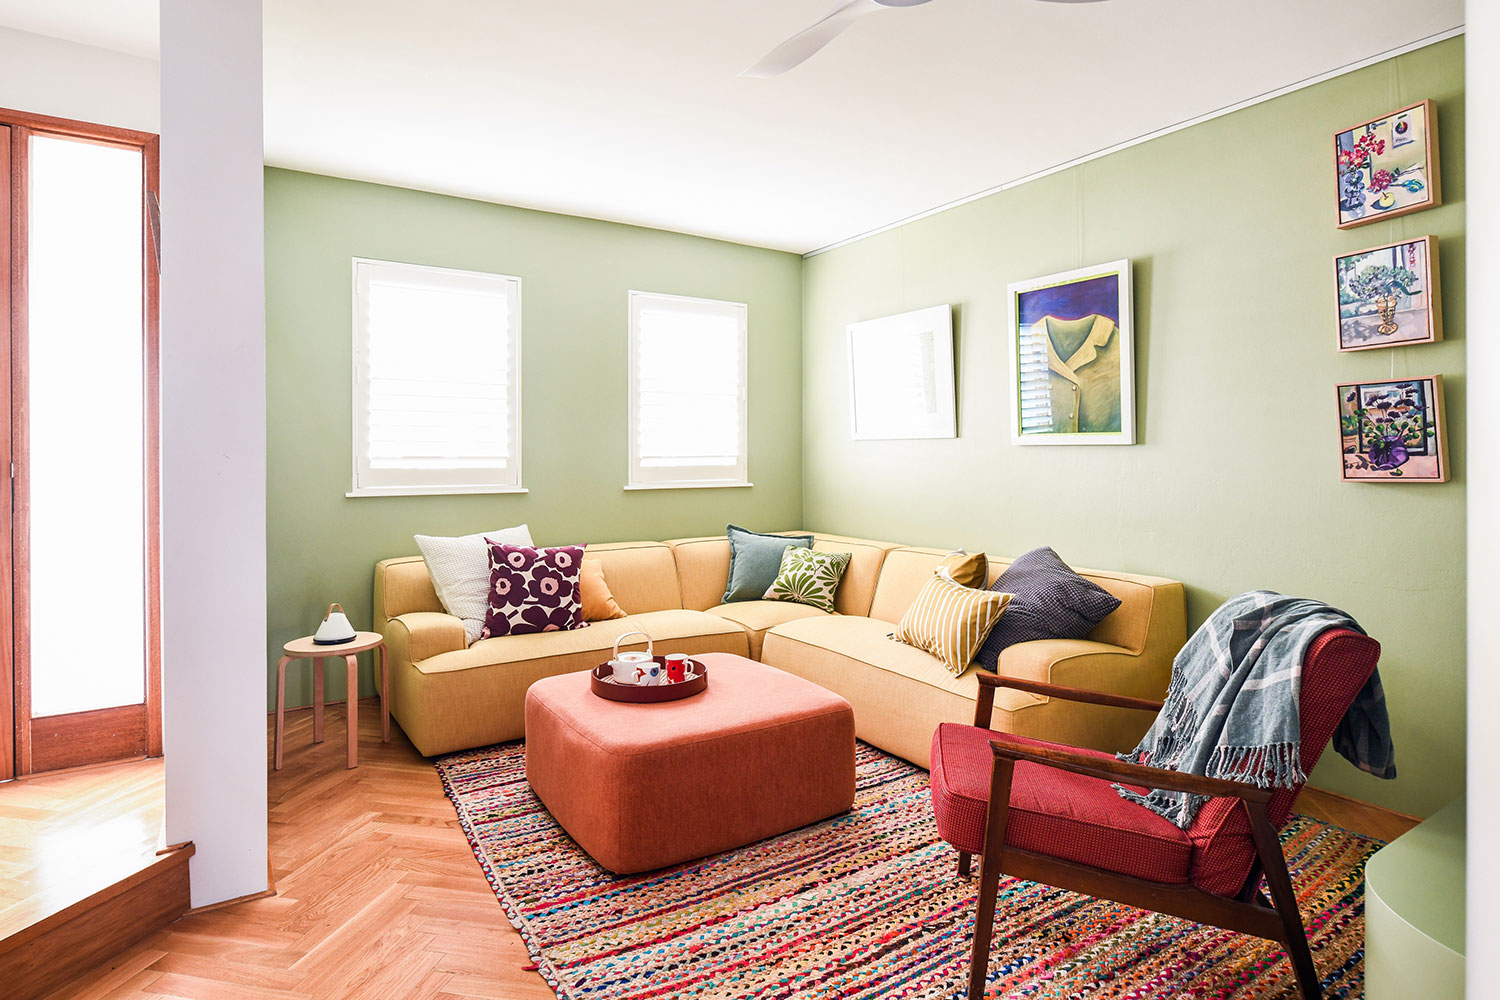 cheerful and happy living spaces created by insidesign, this one in annandale with yellow sofa